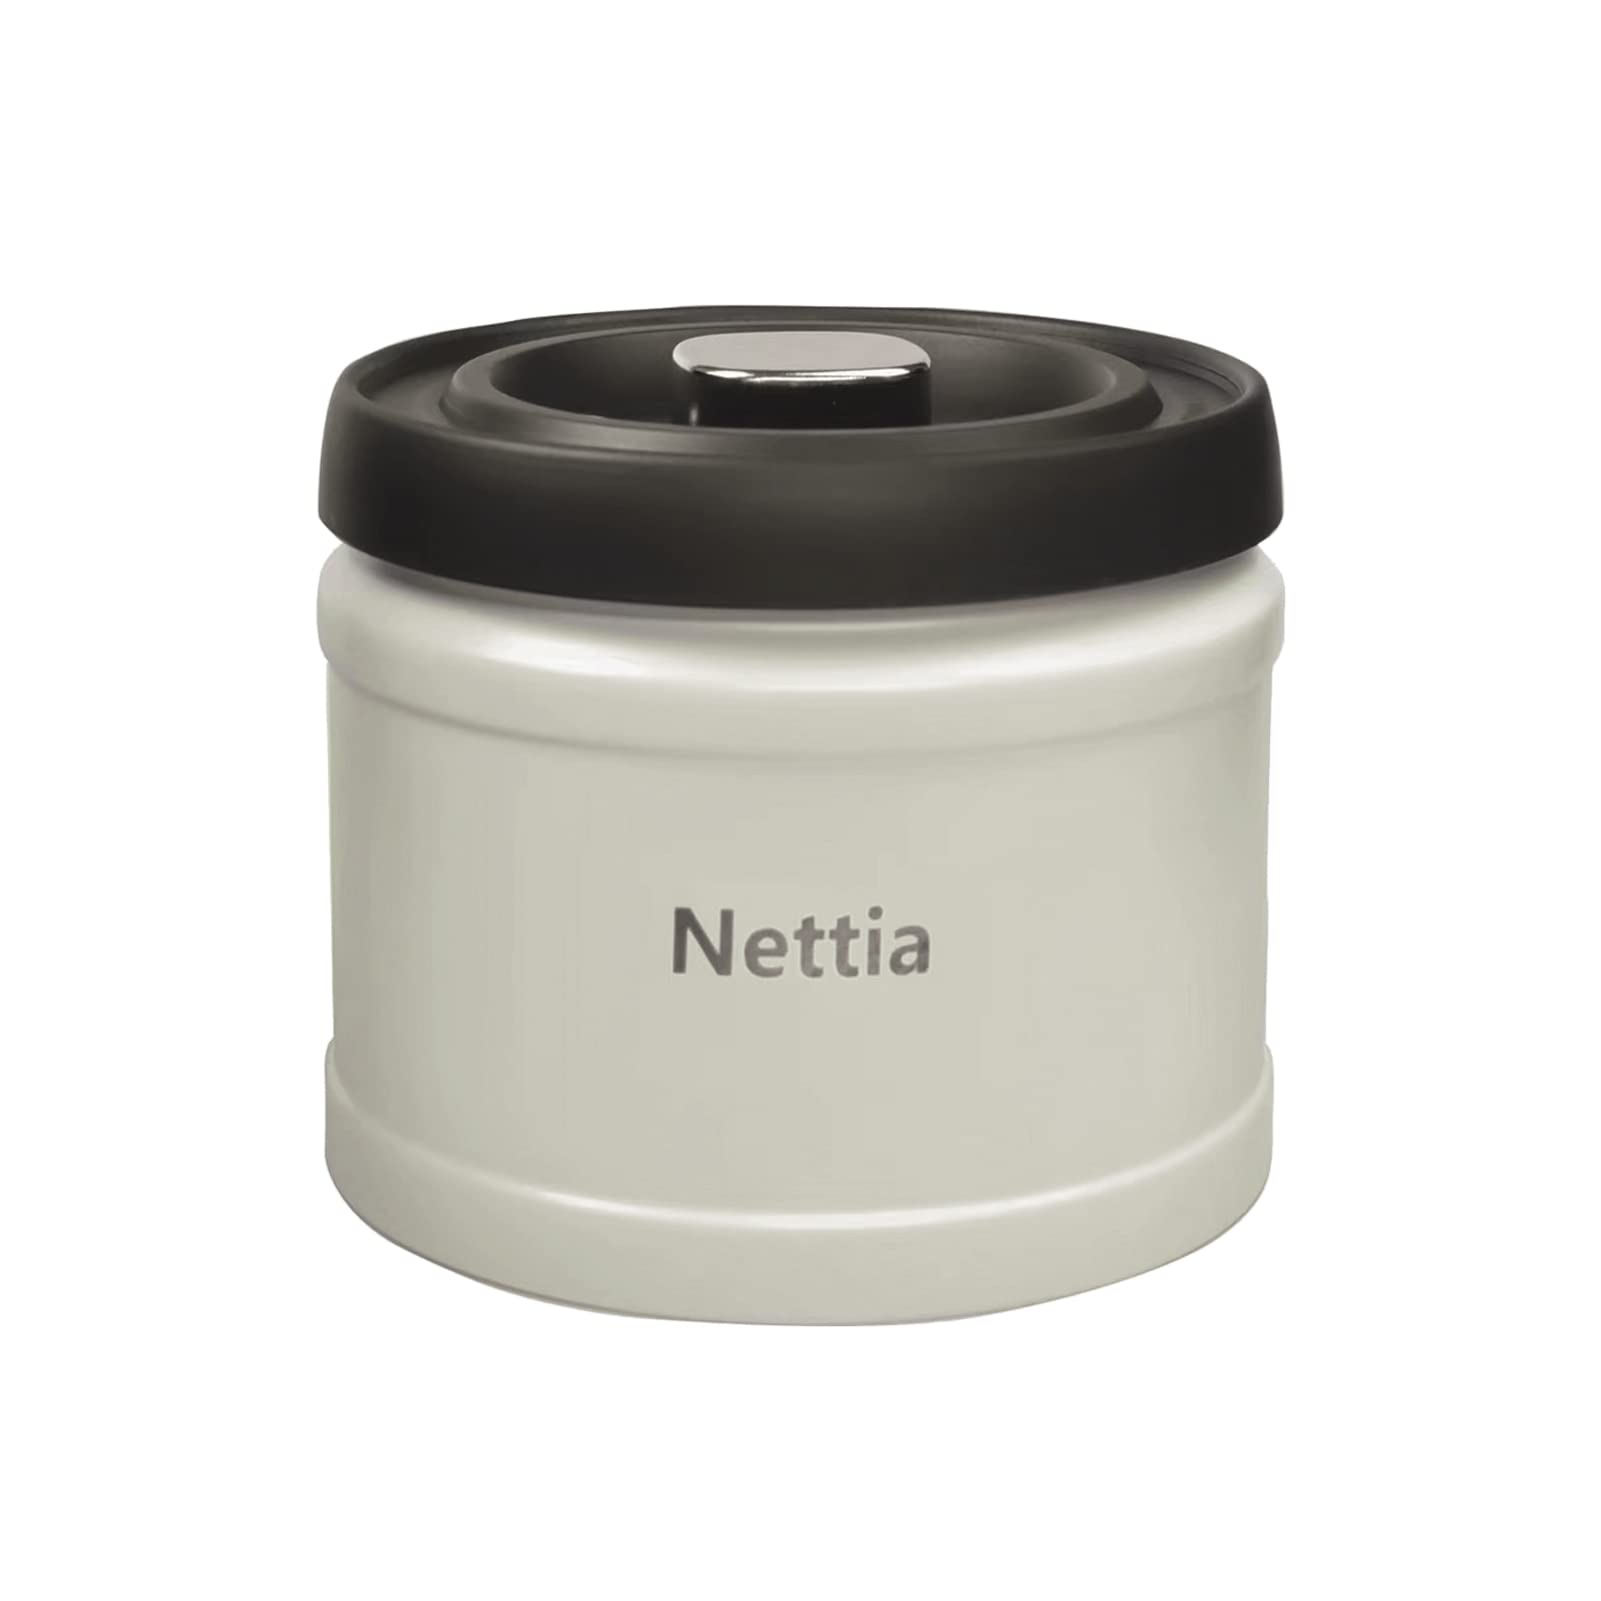 NETTIA Coffee canister 37OZ,Large Capacity Sealed Stainless Steel Food Container, Pressing to extract air type,Beige, 5.2" x 5.9"